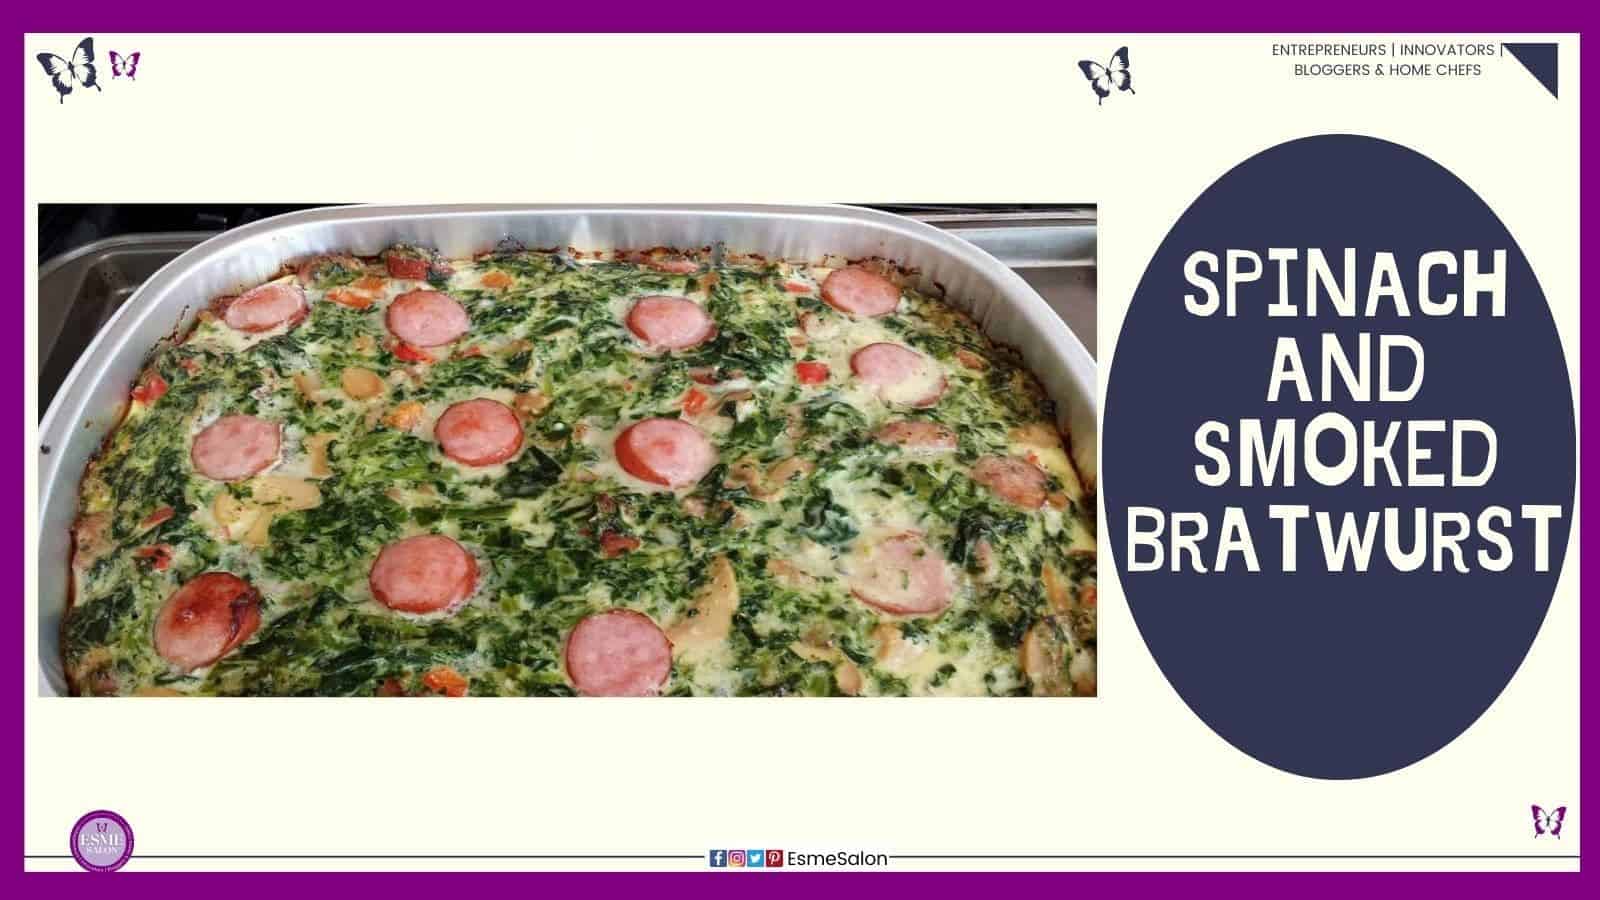 an image of a tinfoil dish filled with Spinach and Smoked Bratwurst and egg bake